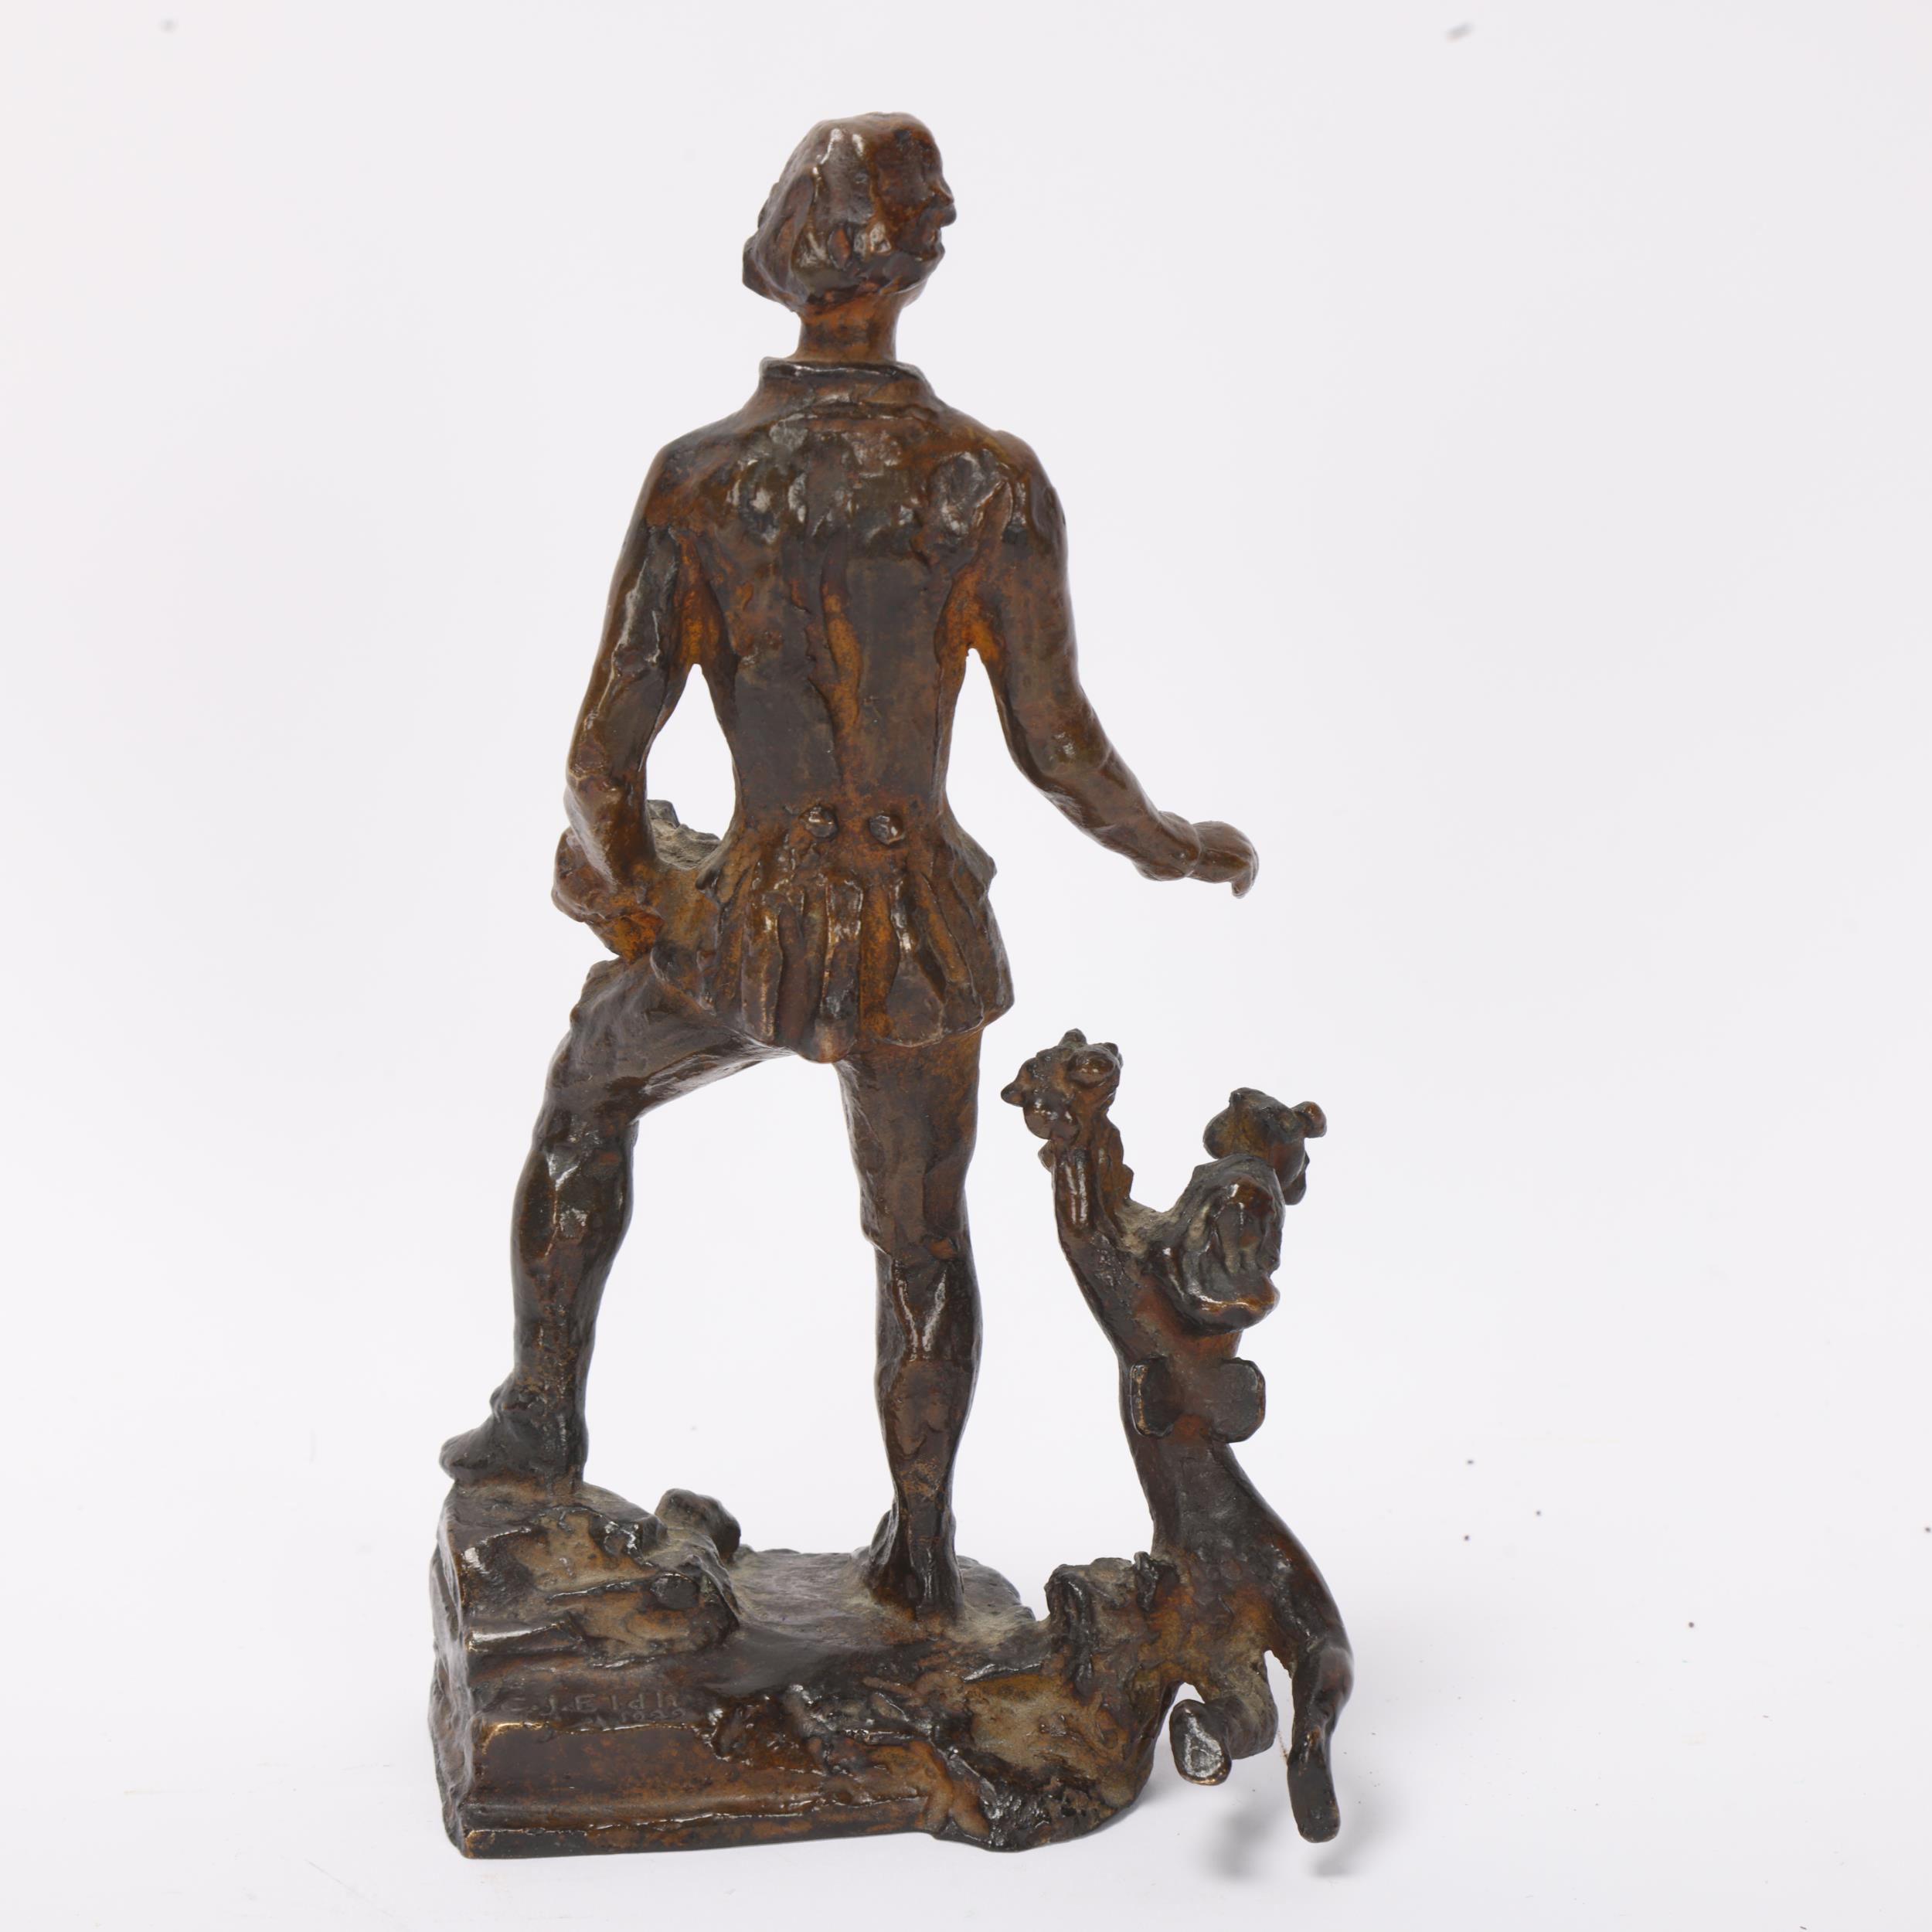 Carl Johan Eldh (1873 - 1954), man and cherub, patinated bronze sculpture, signed on base, dated - Image 2 of 3